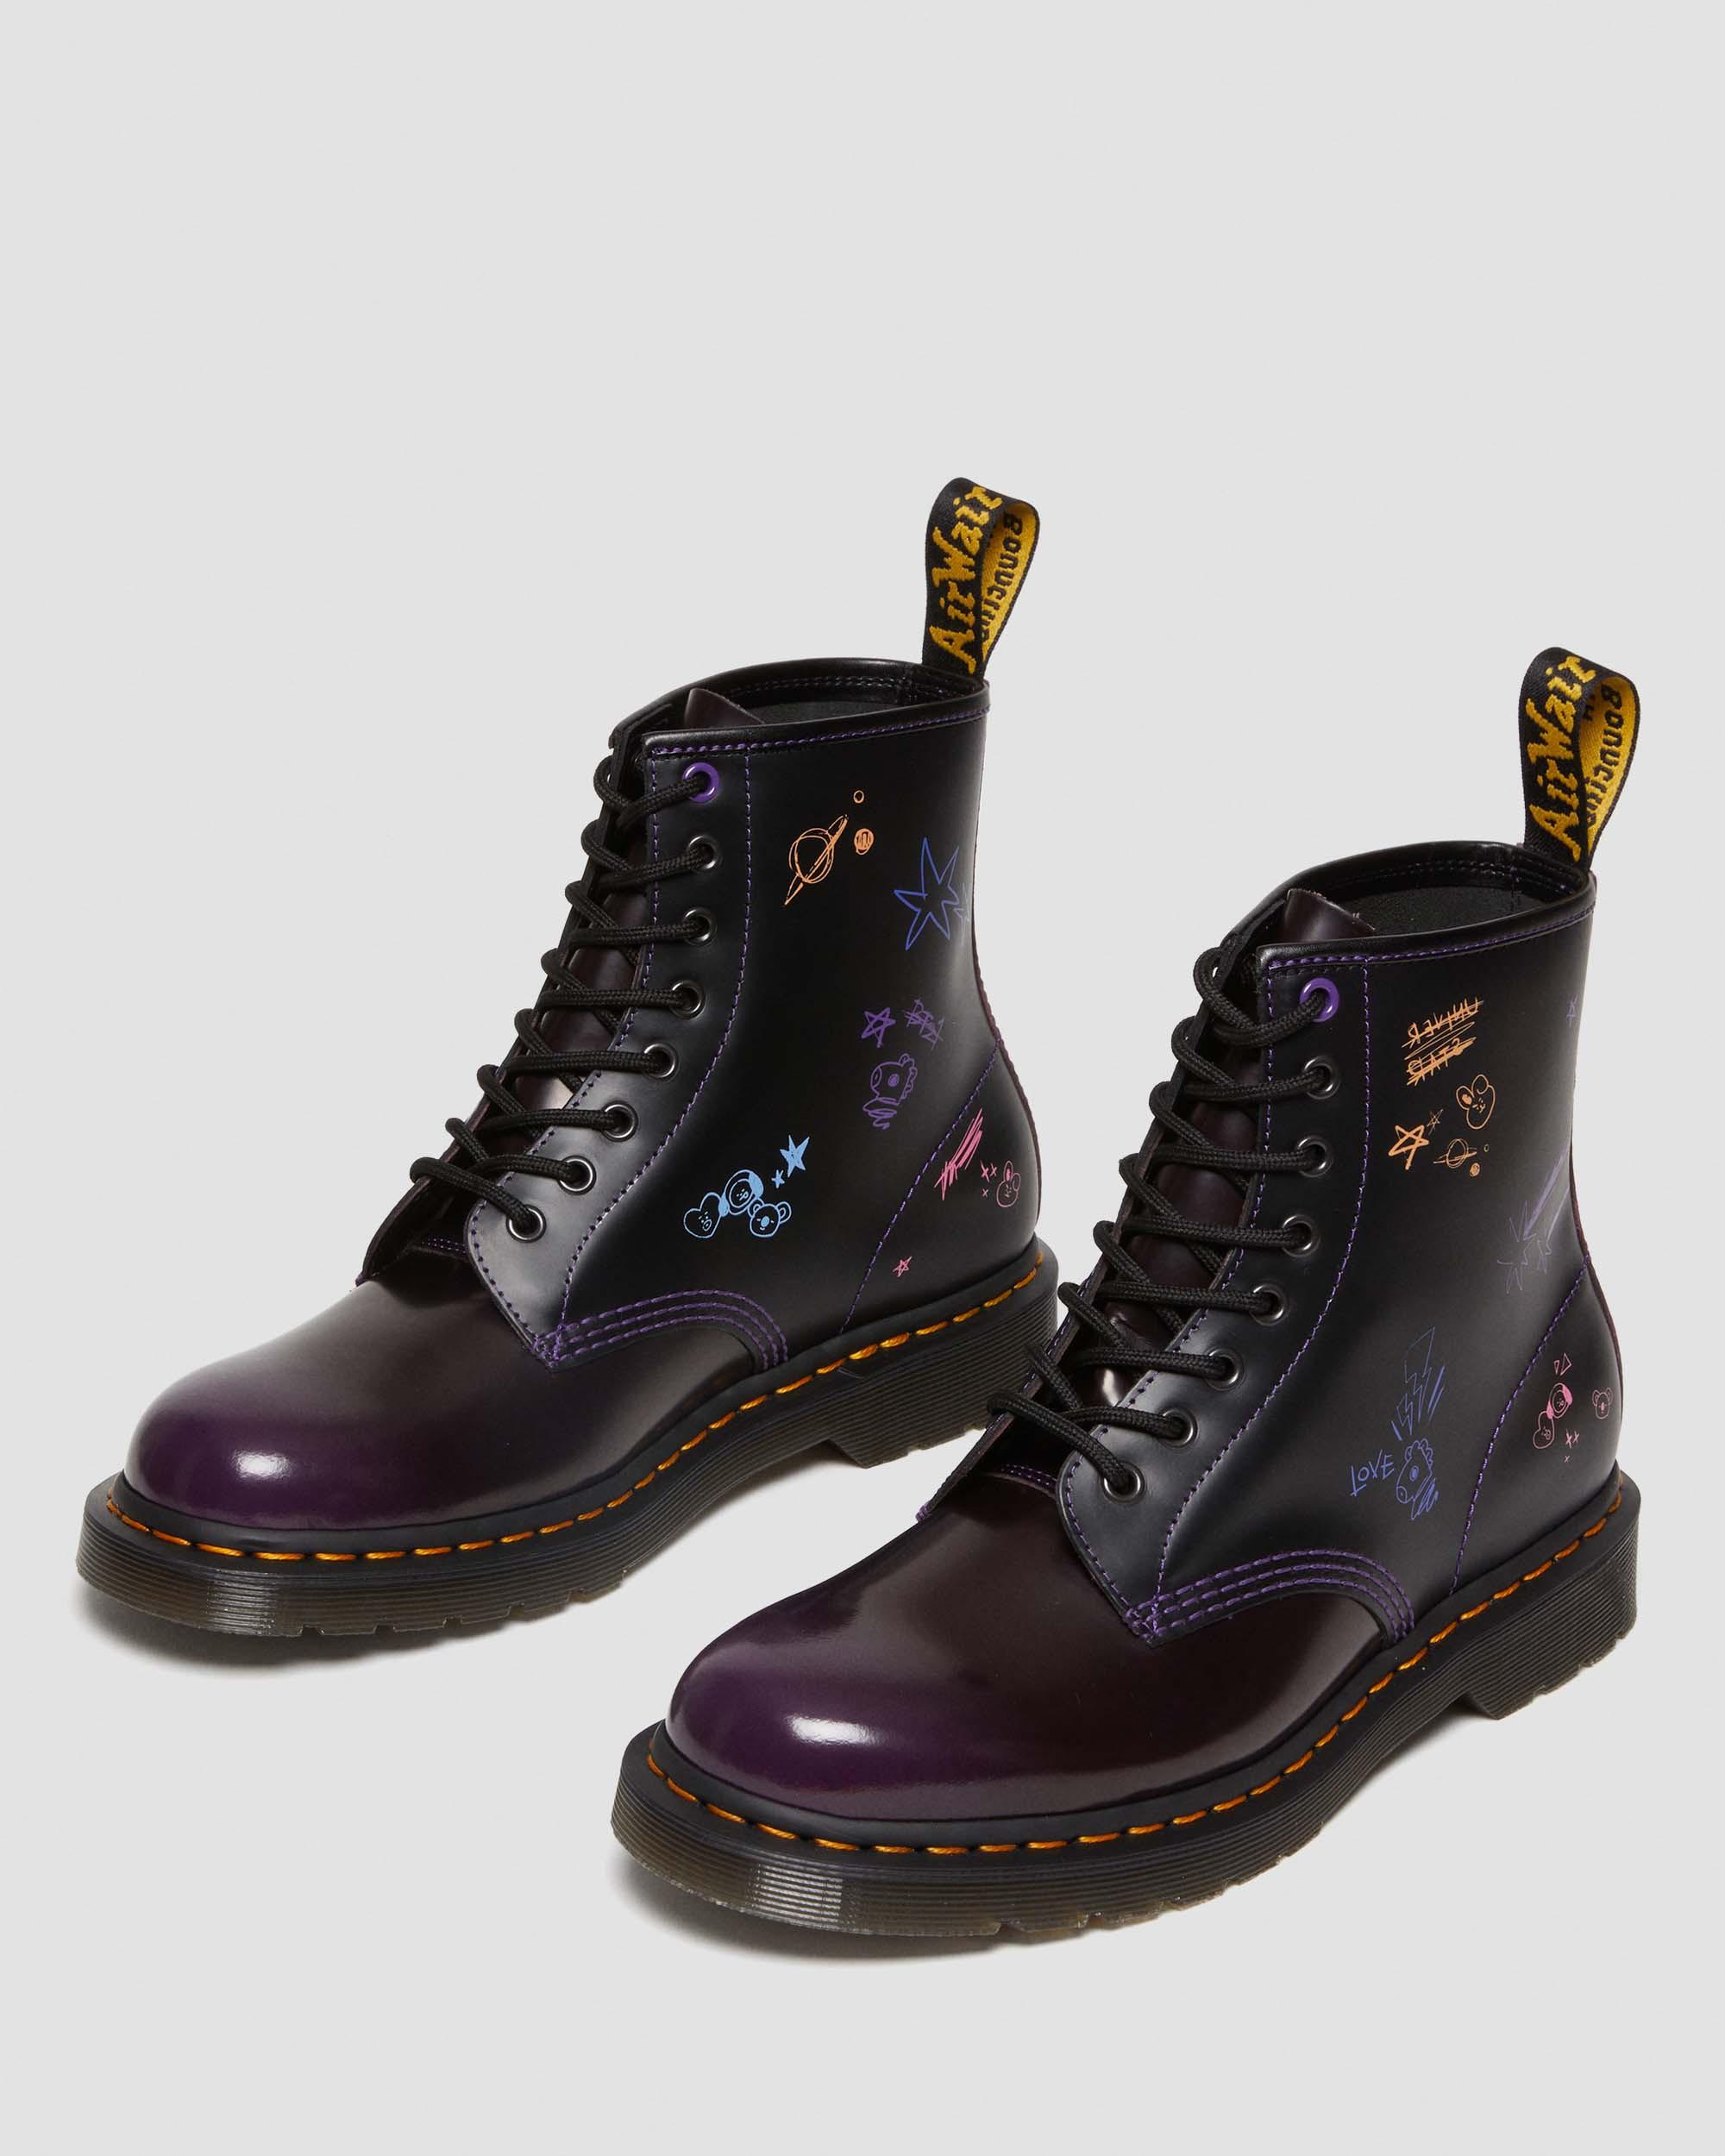 1460 BT21 Leather Boots1460 BT21 Leather Boots Dr. Martens